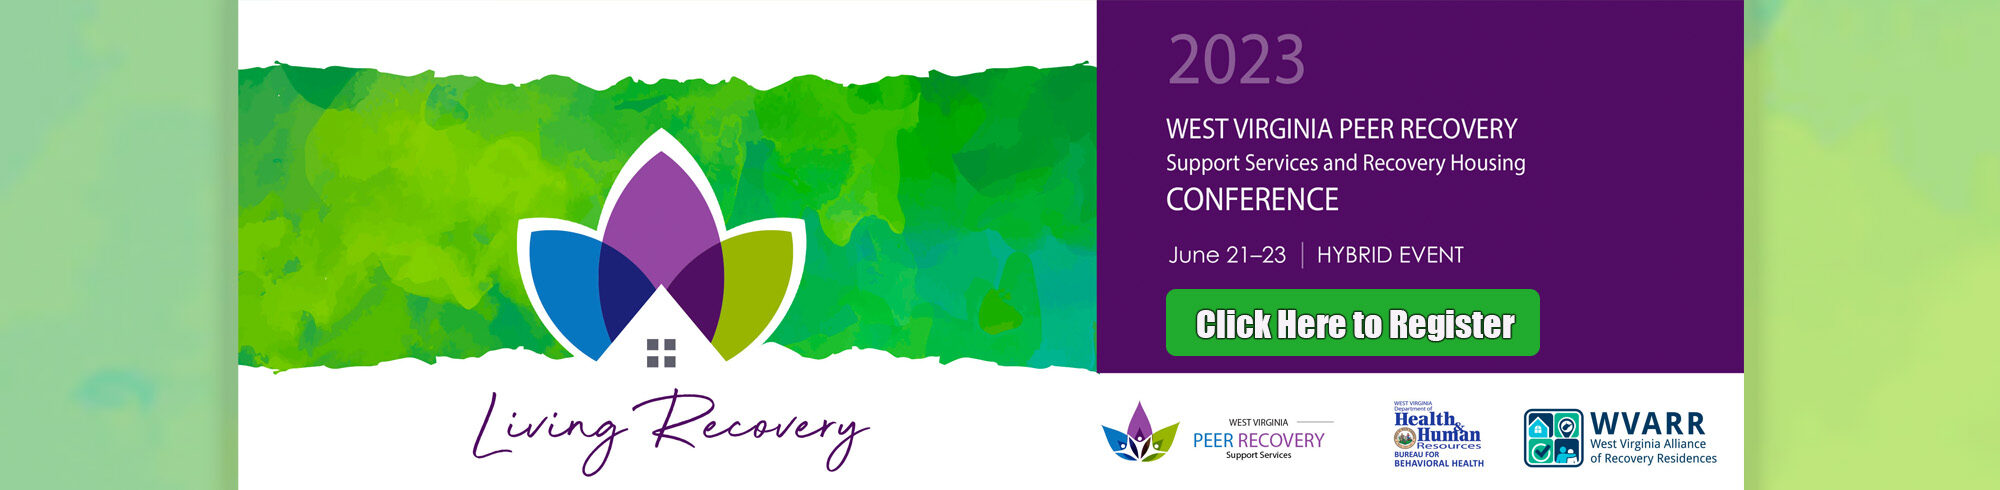 2023 WV Peer Recovery Conference